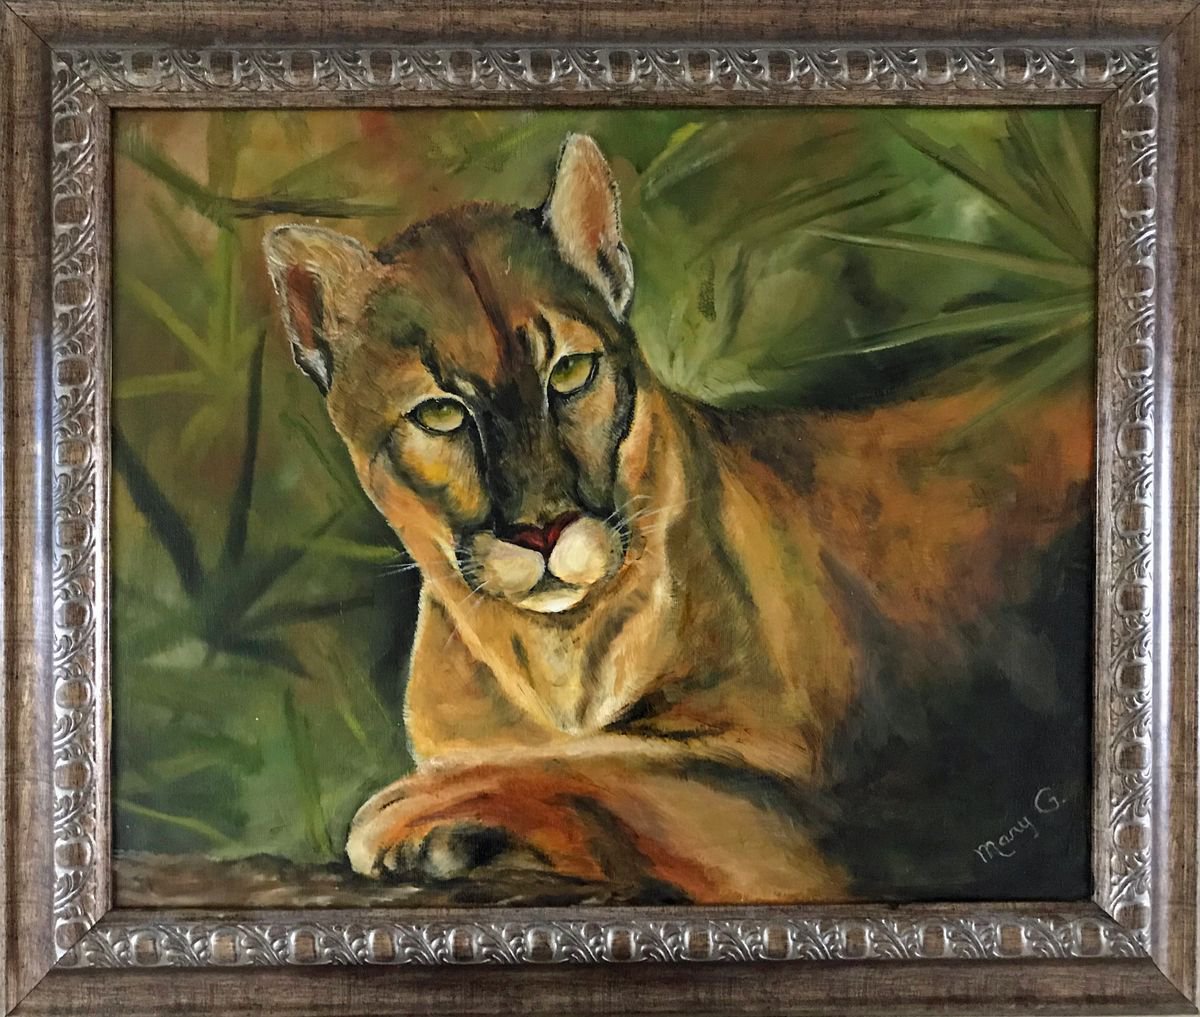 Puma Original Oil Painting on a canvas Fully Framed 16x 20 by Mary Gullette